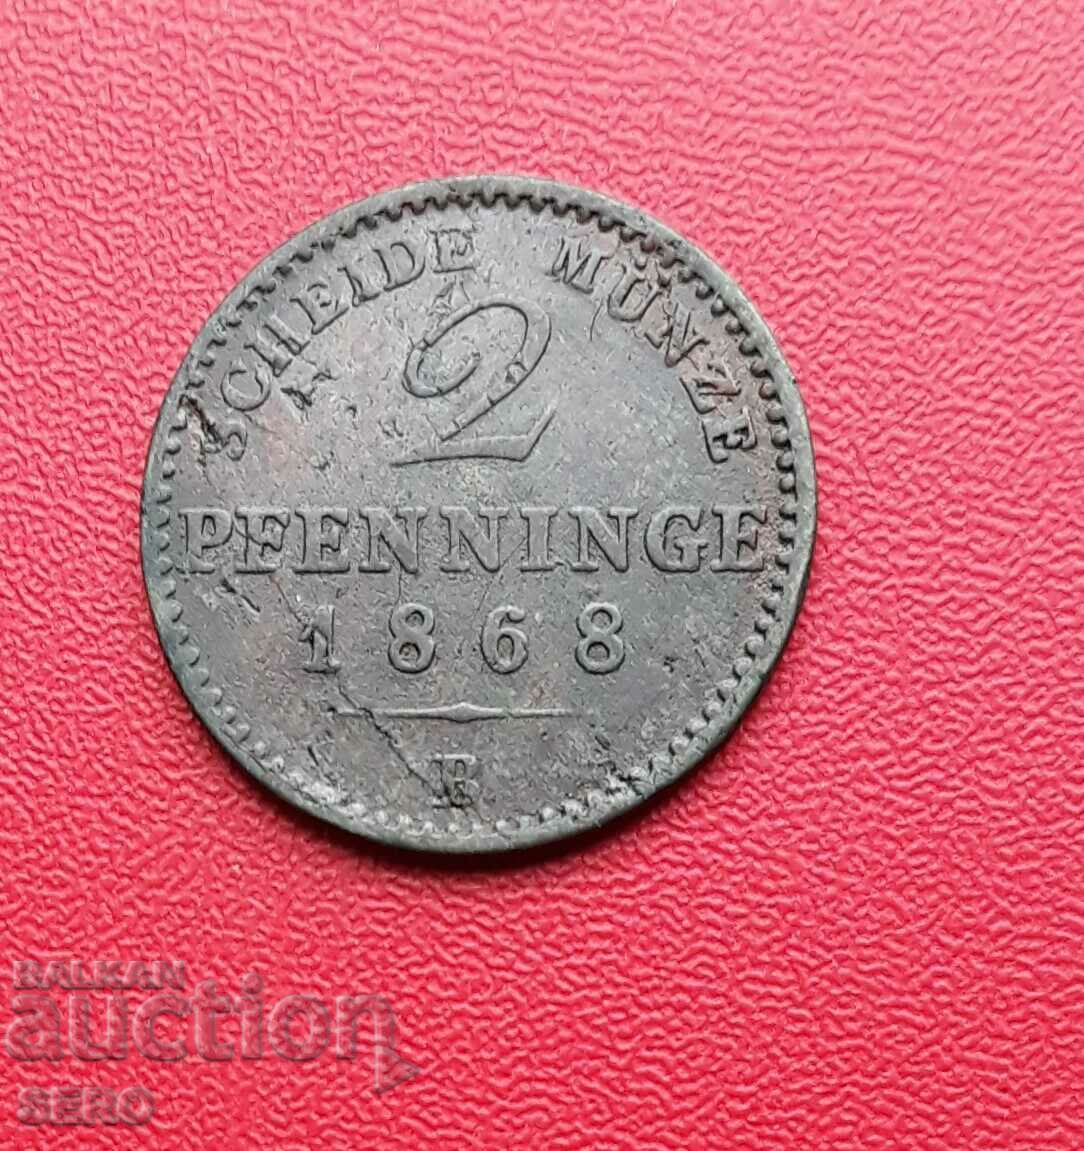 Germany-Prussia-2 Pfennig 1868 In-Hanover